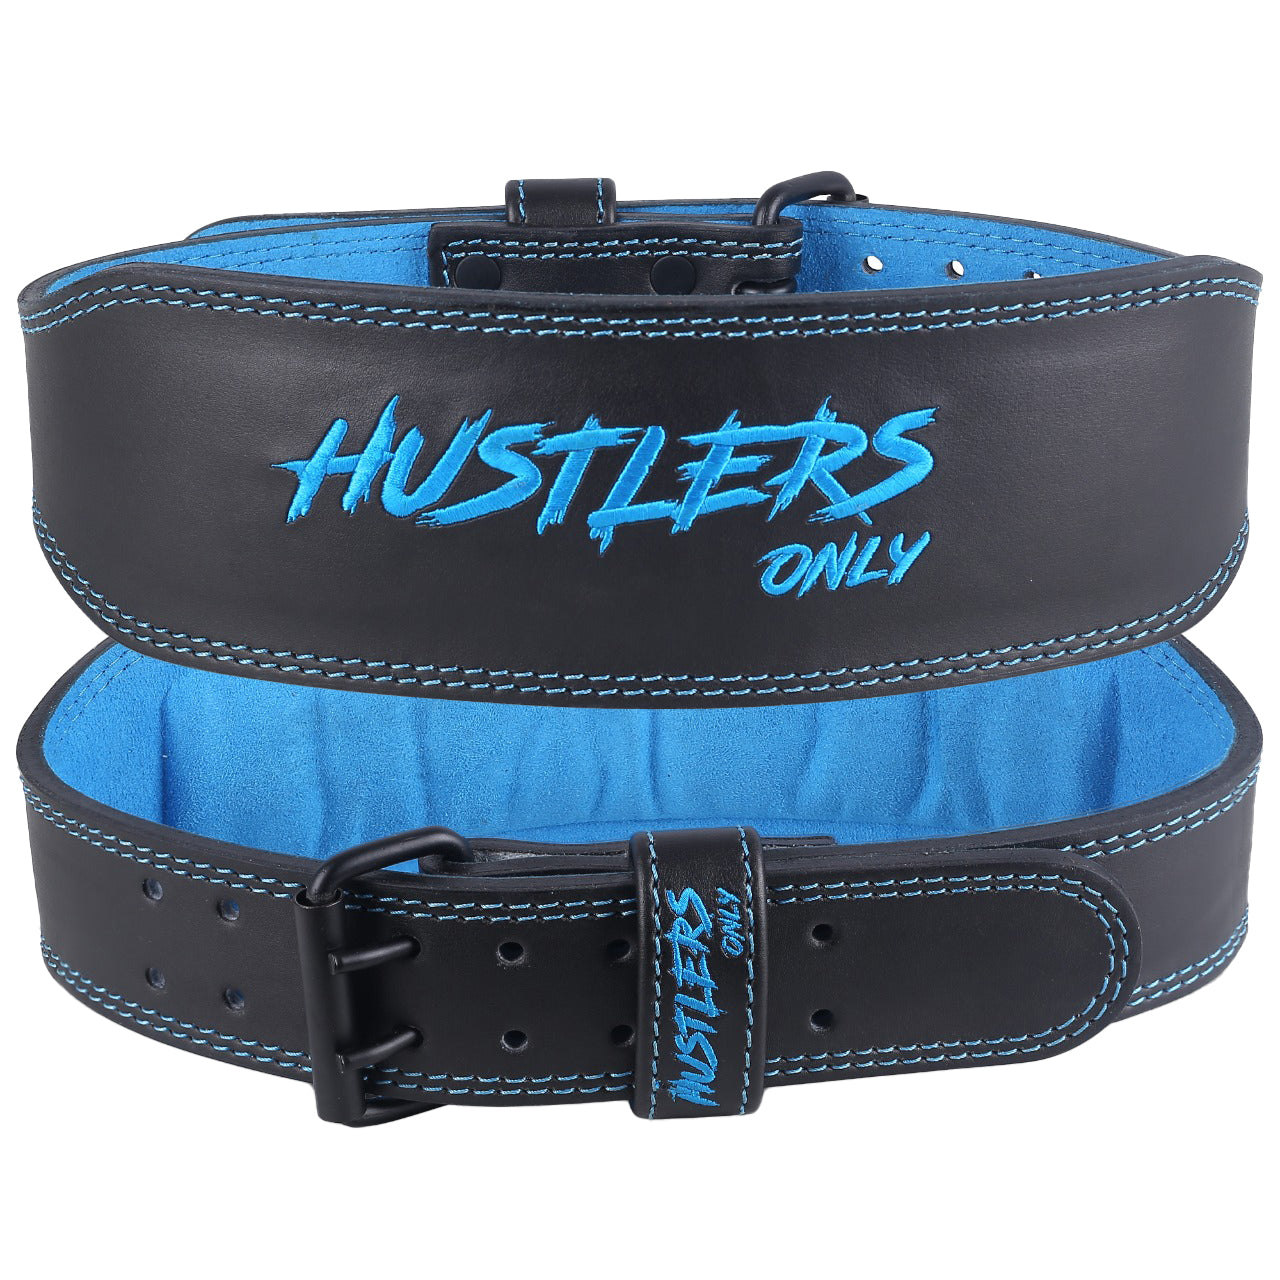 Premium Weight Lifting Belts  Leather and Nylon Belts - HUSTLERS